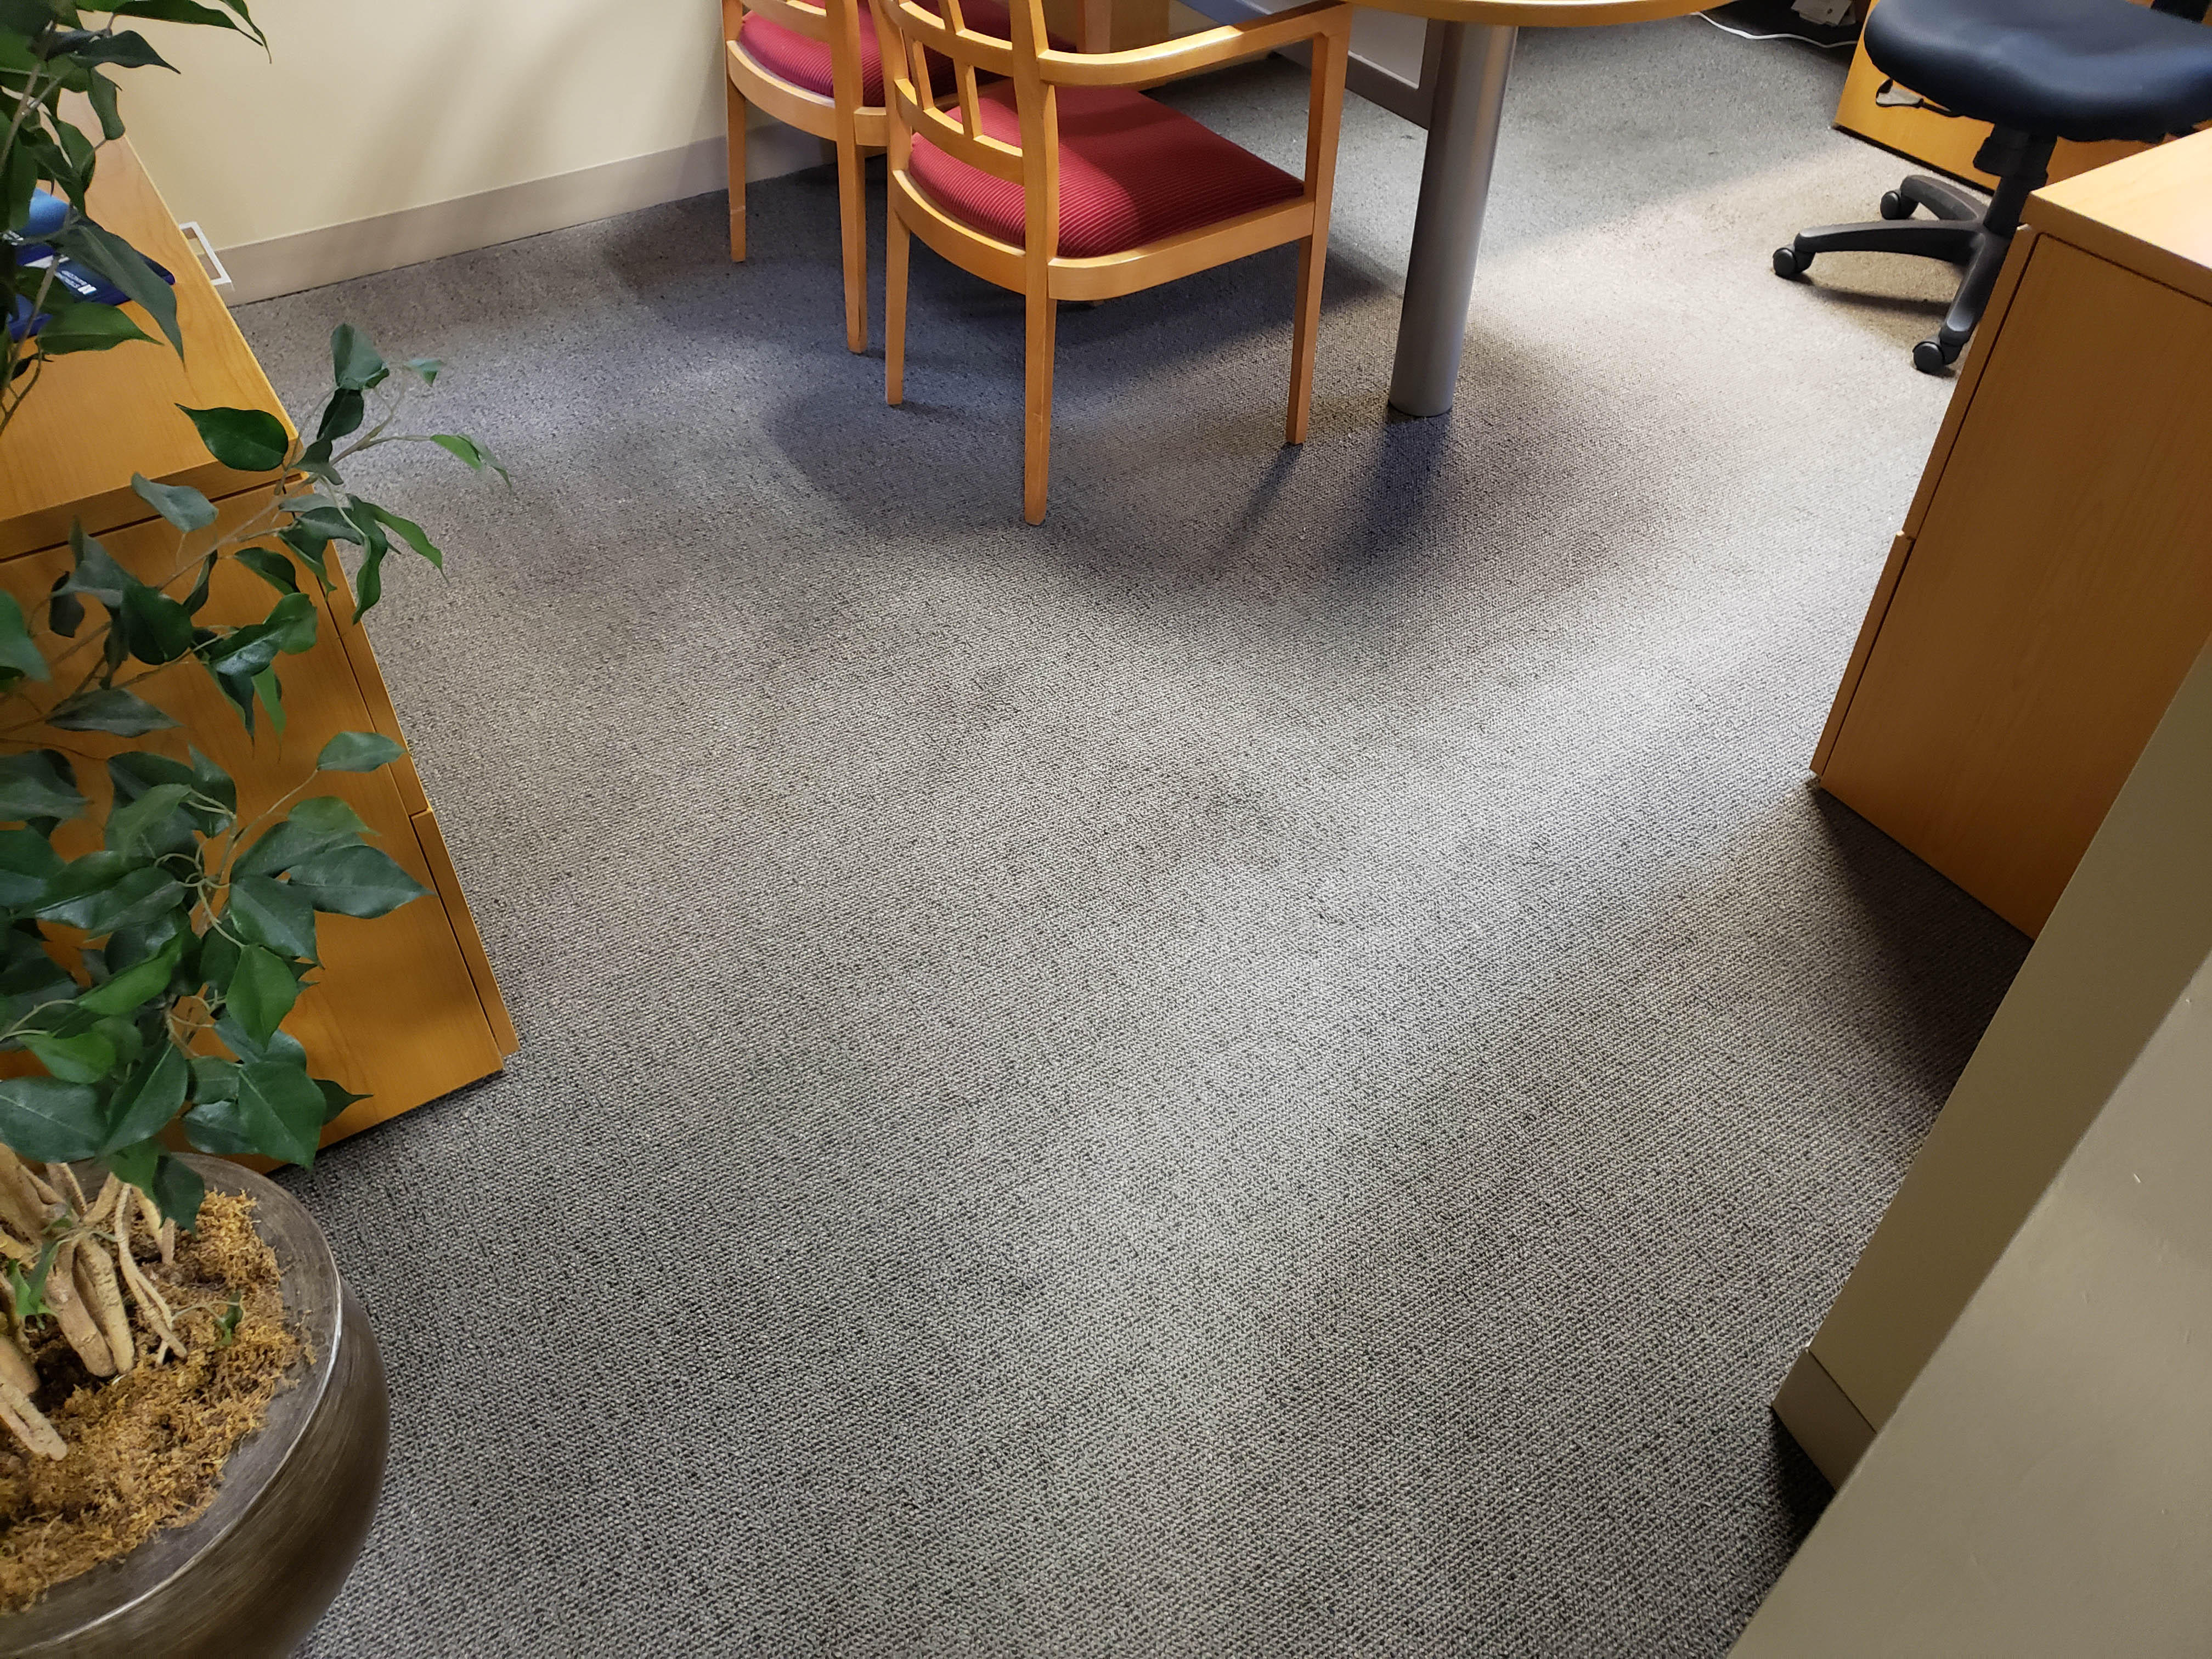 This office was faced with water damage. Luckily, they were able to call SERVPRO Scarsdale/Mount Vernon and we were able to quickly assess the damage!